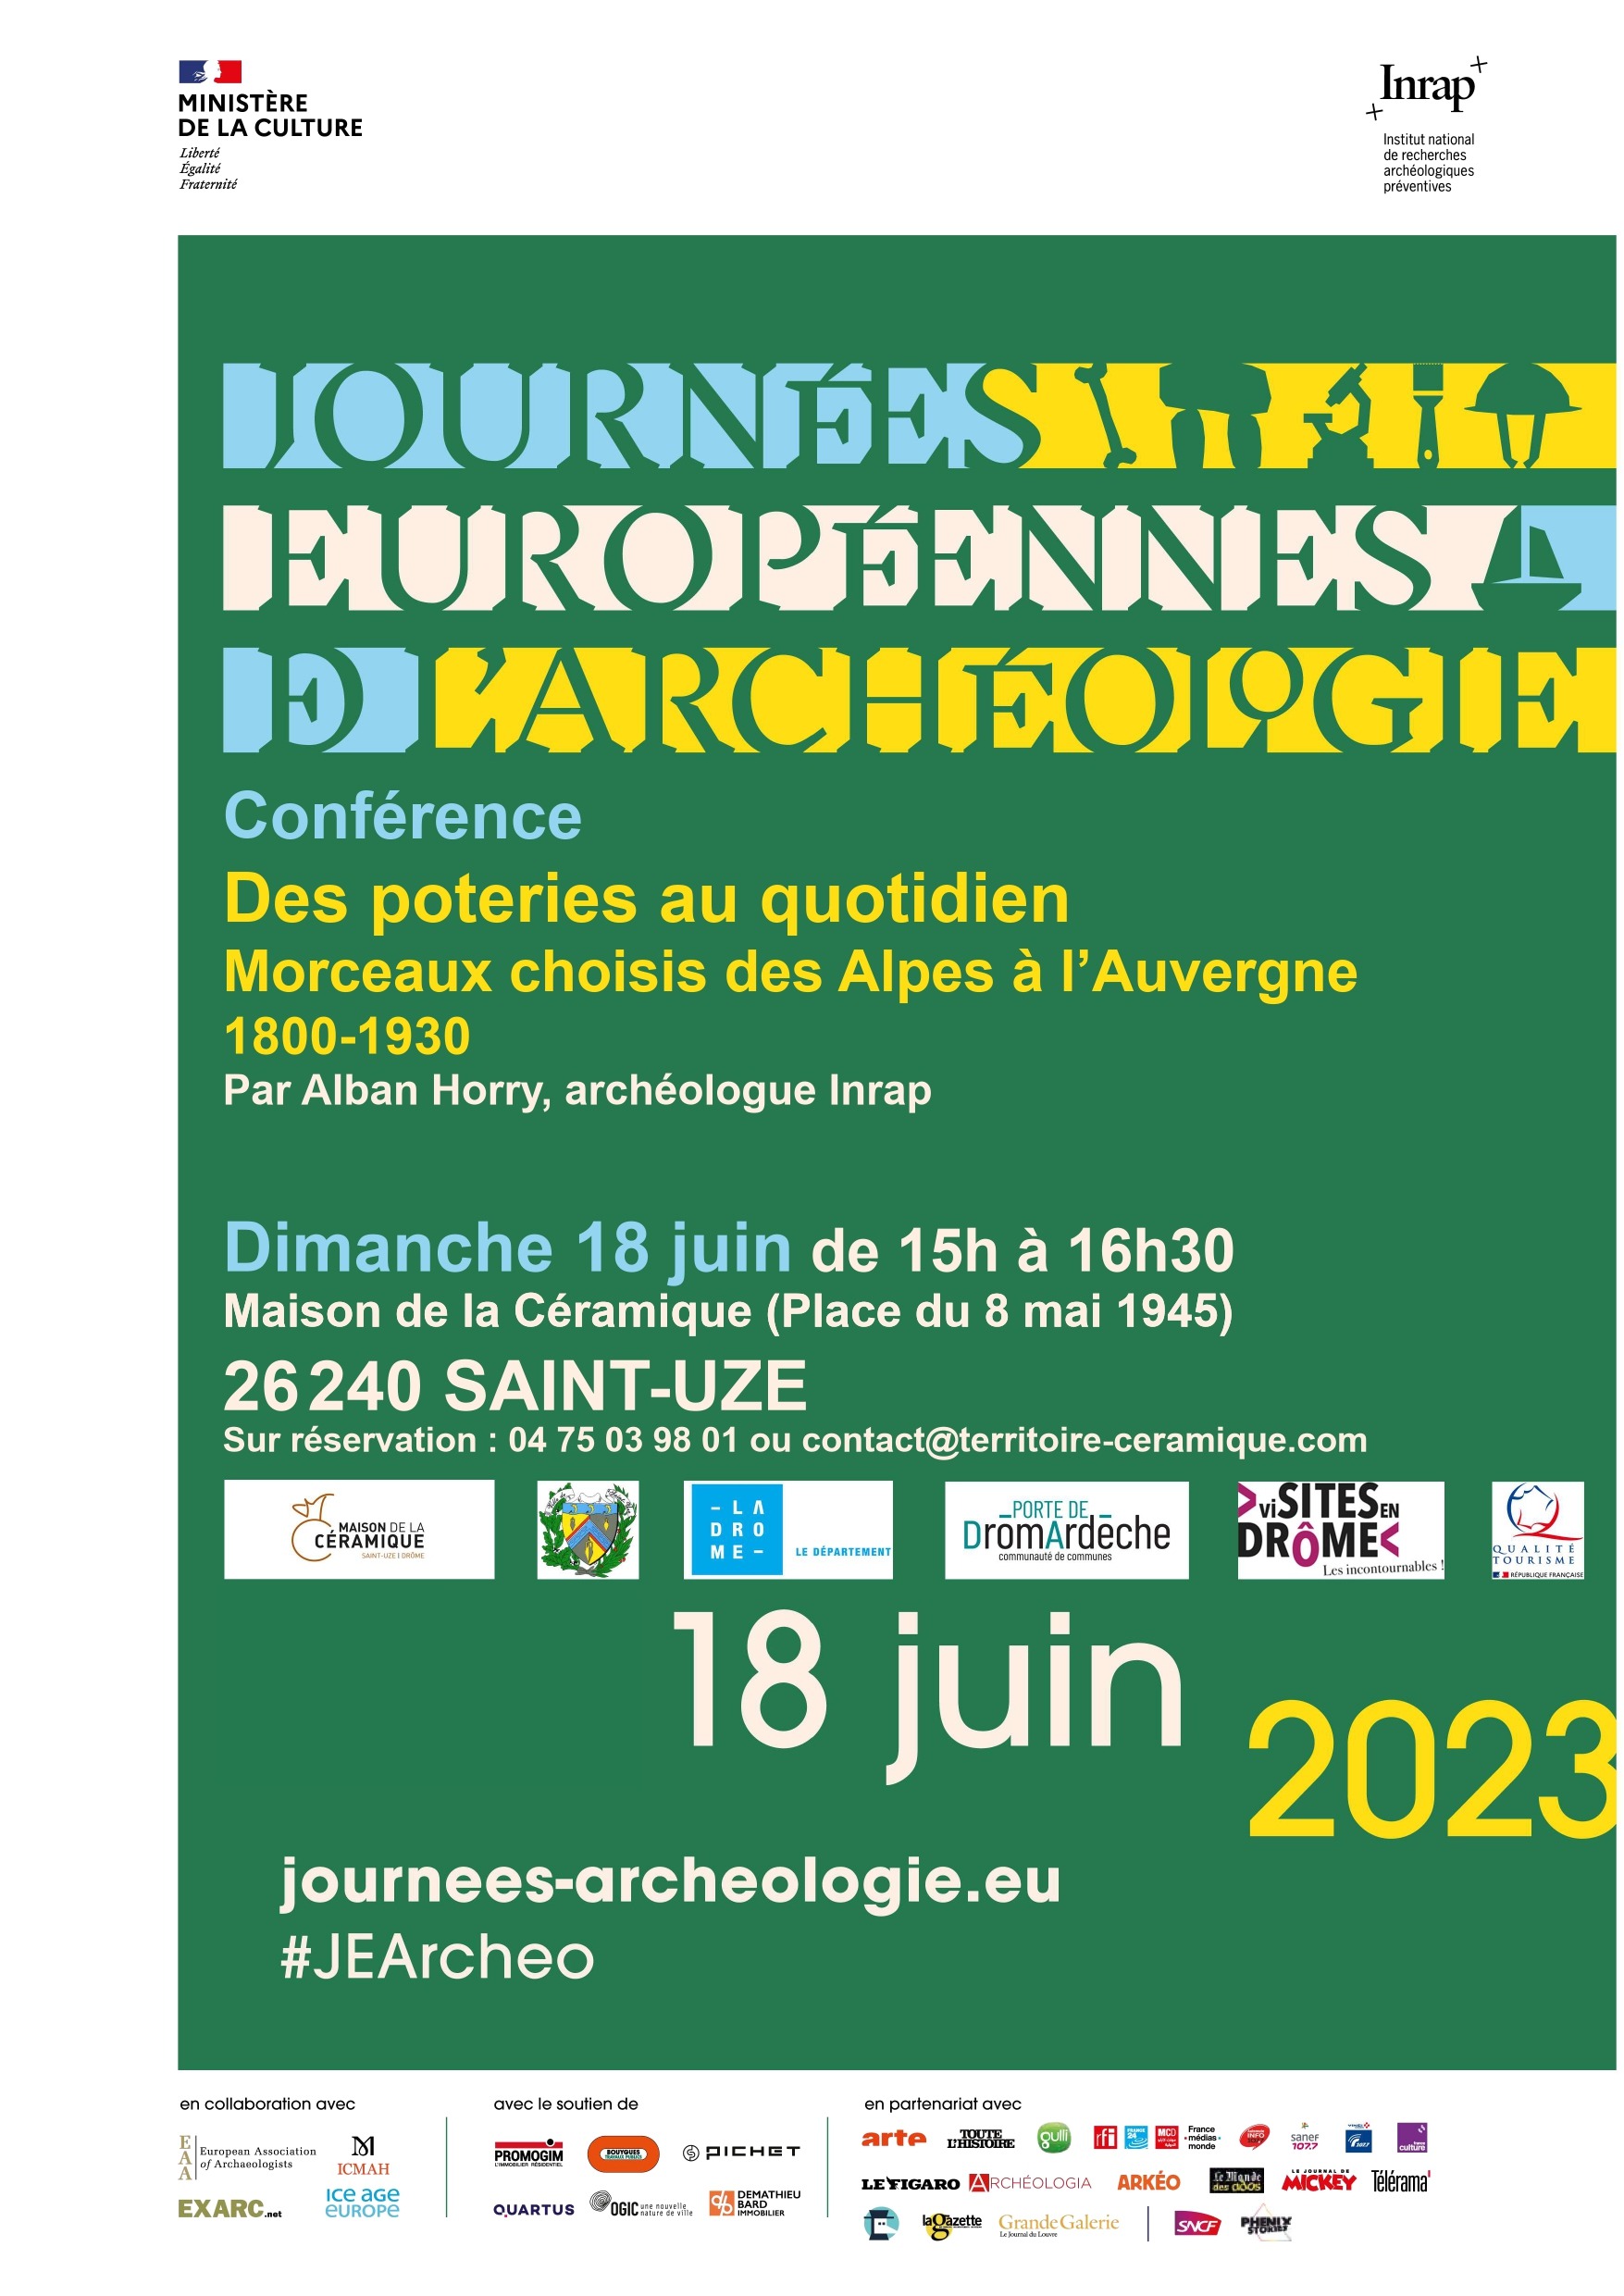 conference-journees-archeologie-inrap-lyon